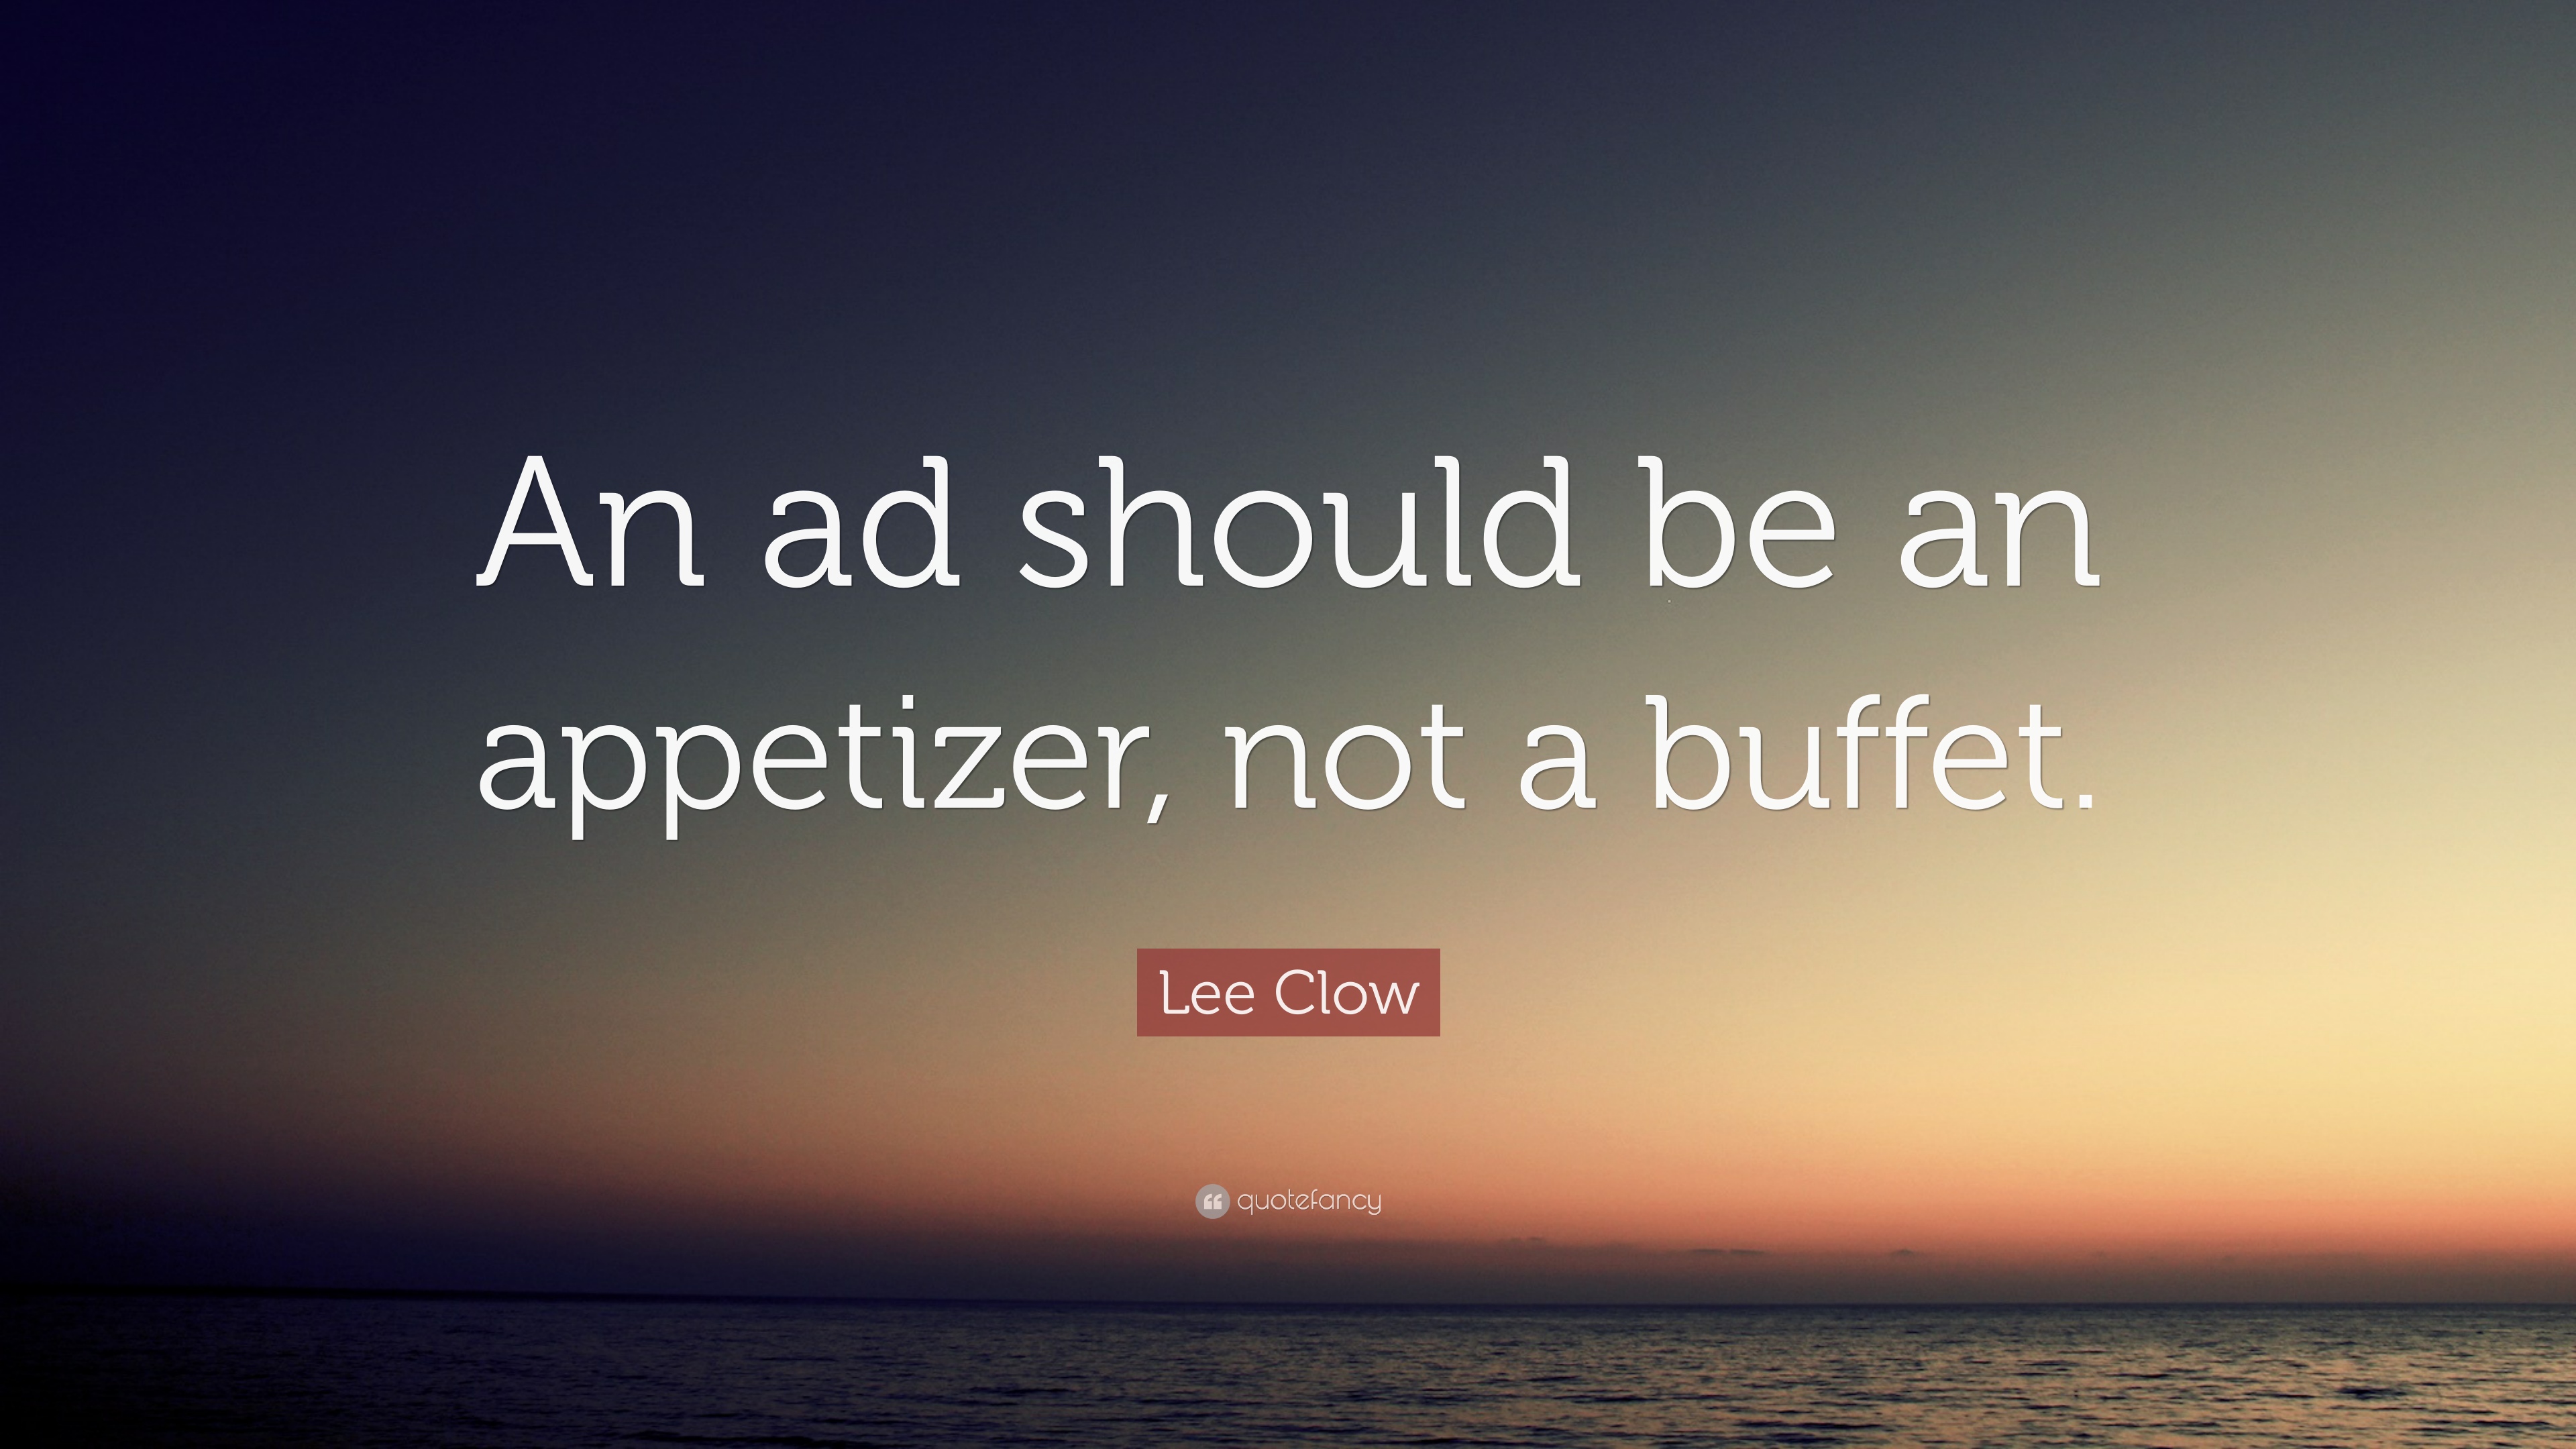 Lee Clow Quote: “An ad should be an appetizer, not a buffet